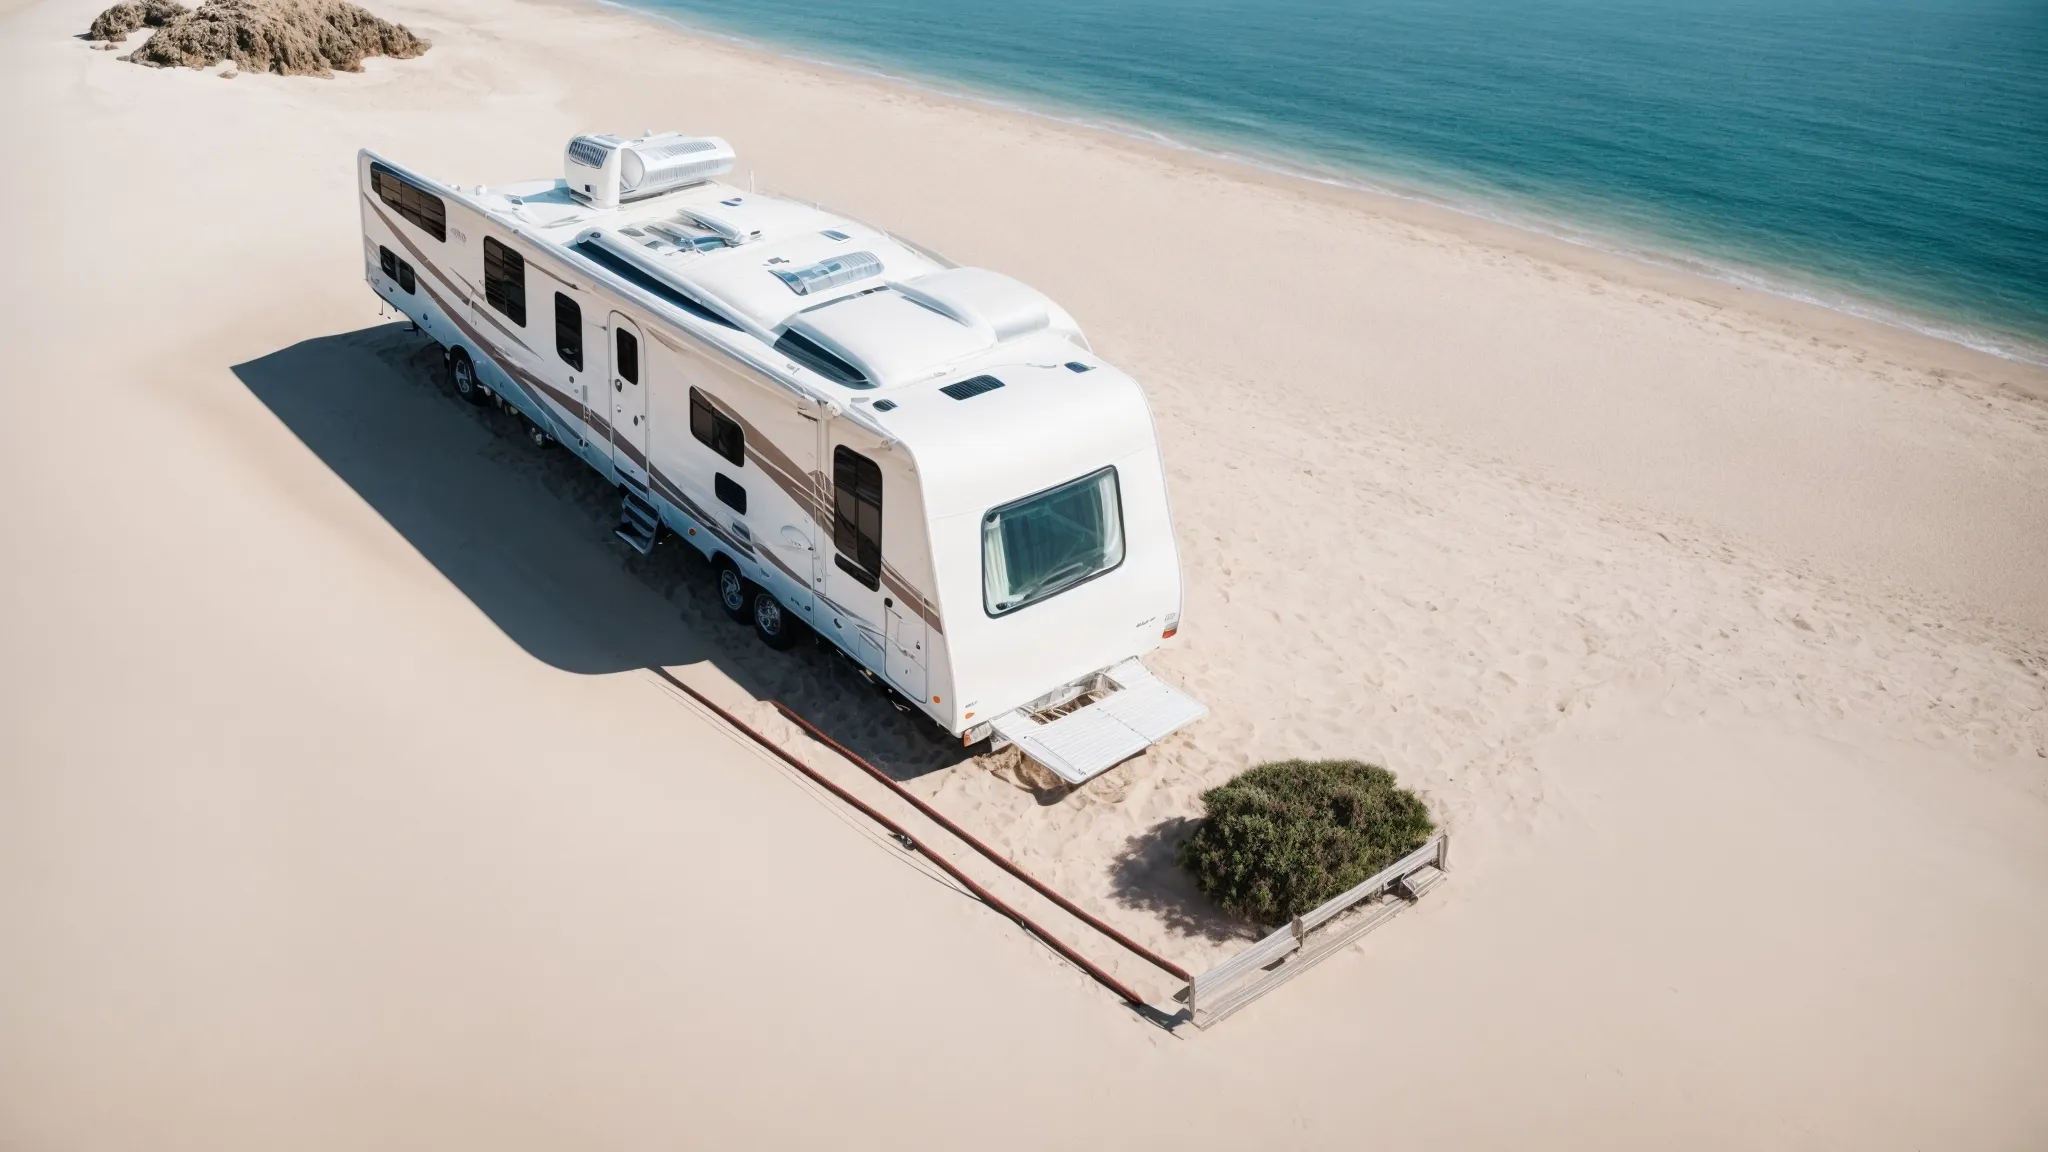 an rv is parked beside a pristine beach with the calm sea stretching to the horizon under a clear sky.